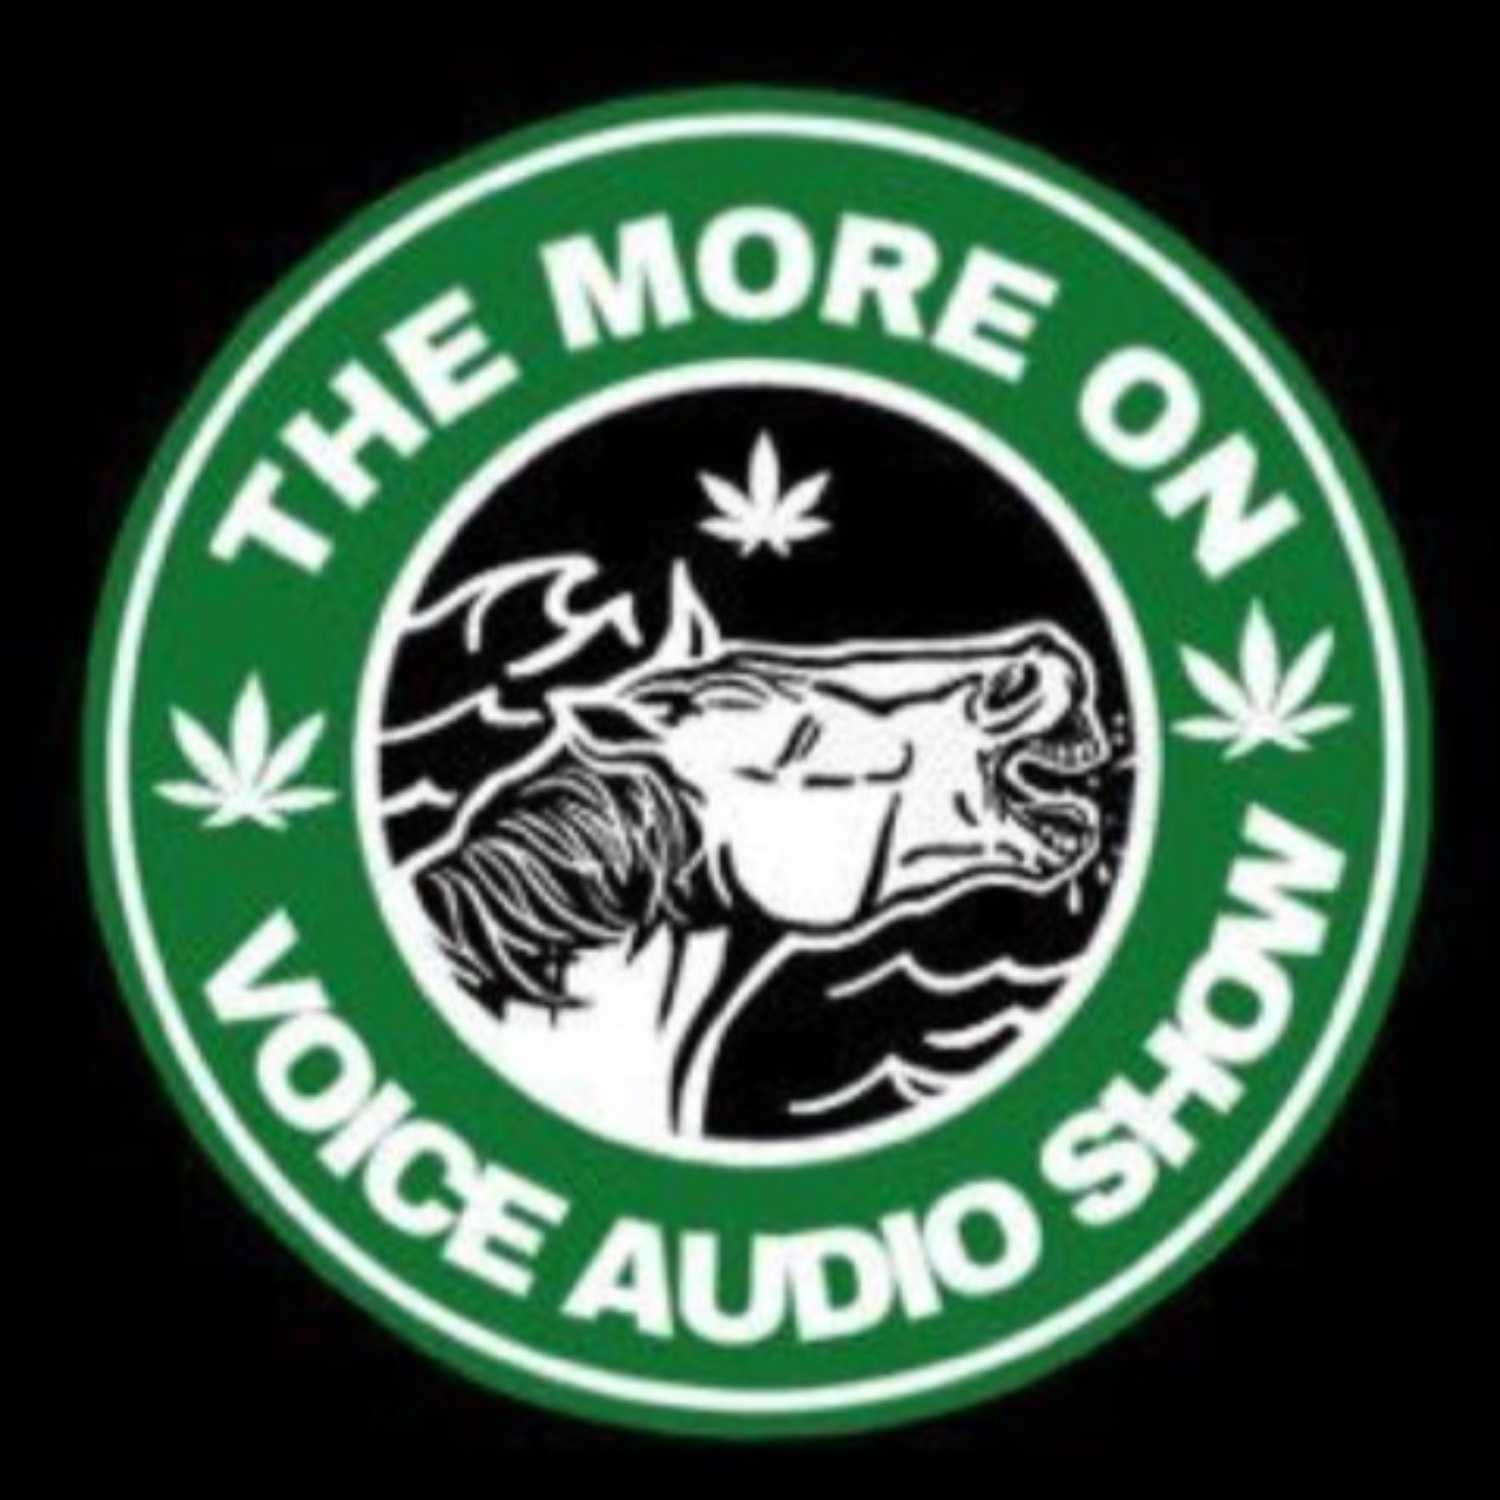 The More On Voice Audio Show: Episode 48 (Sydney)